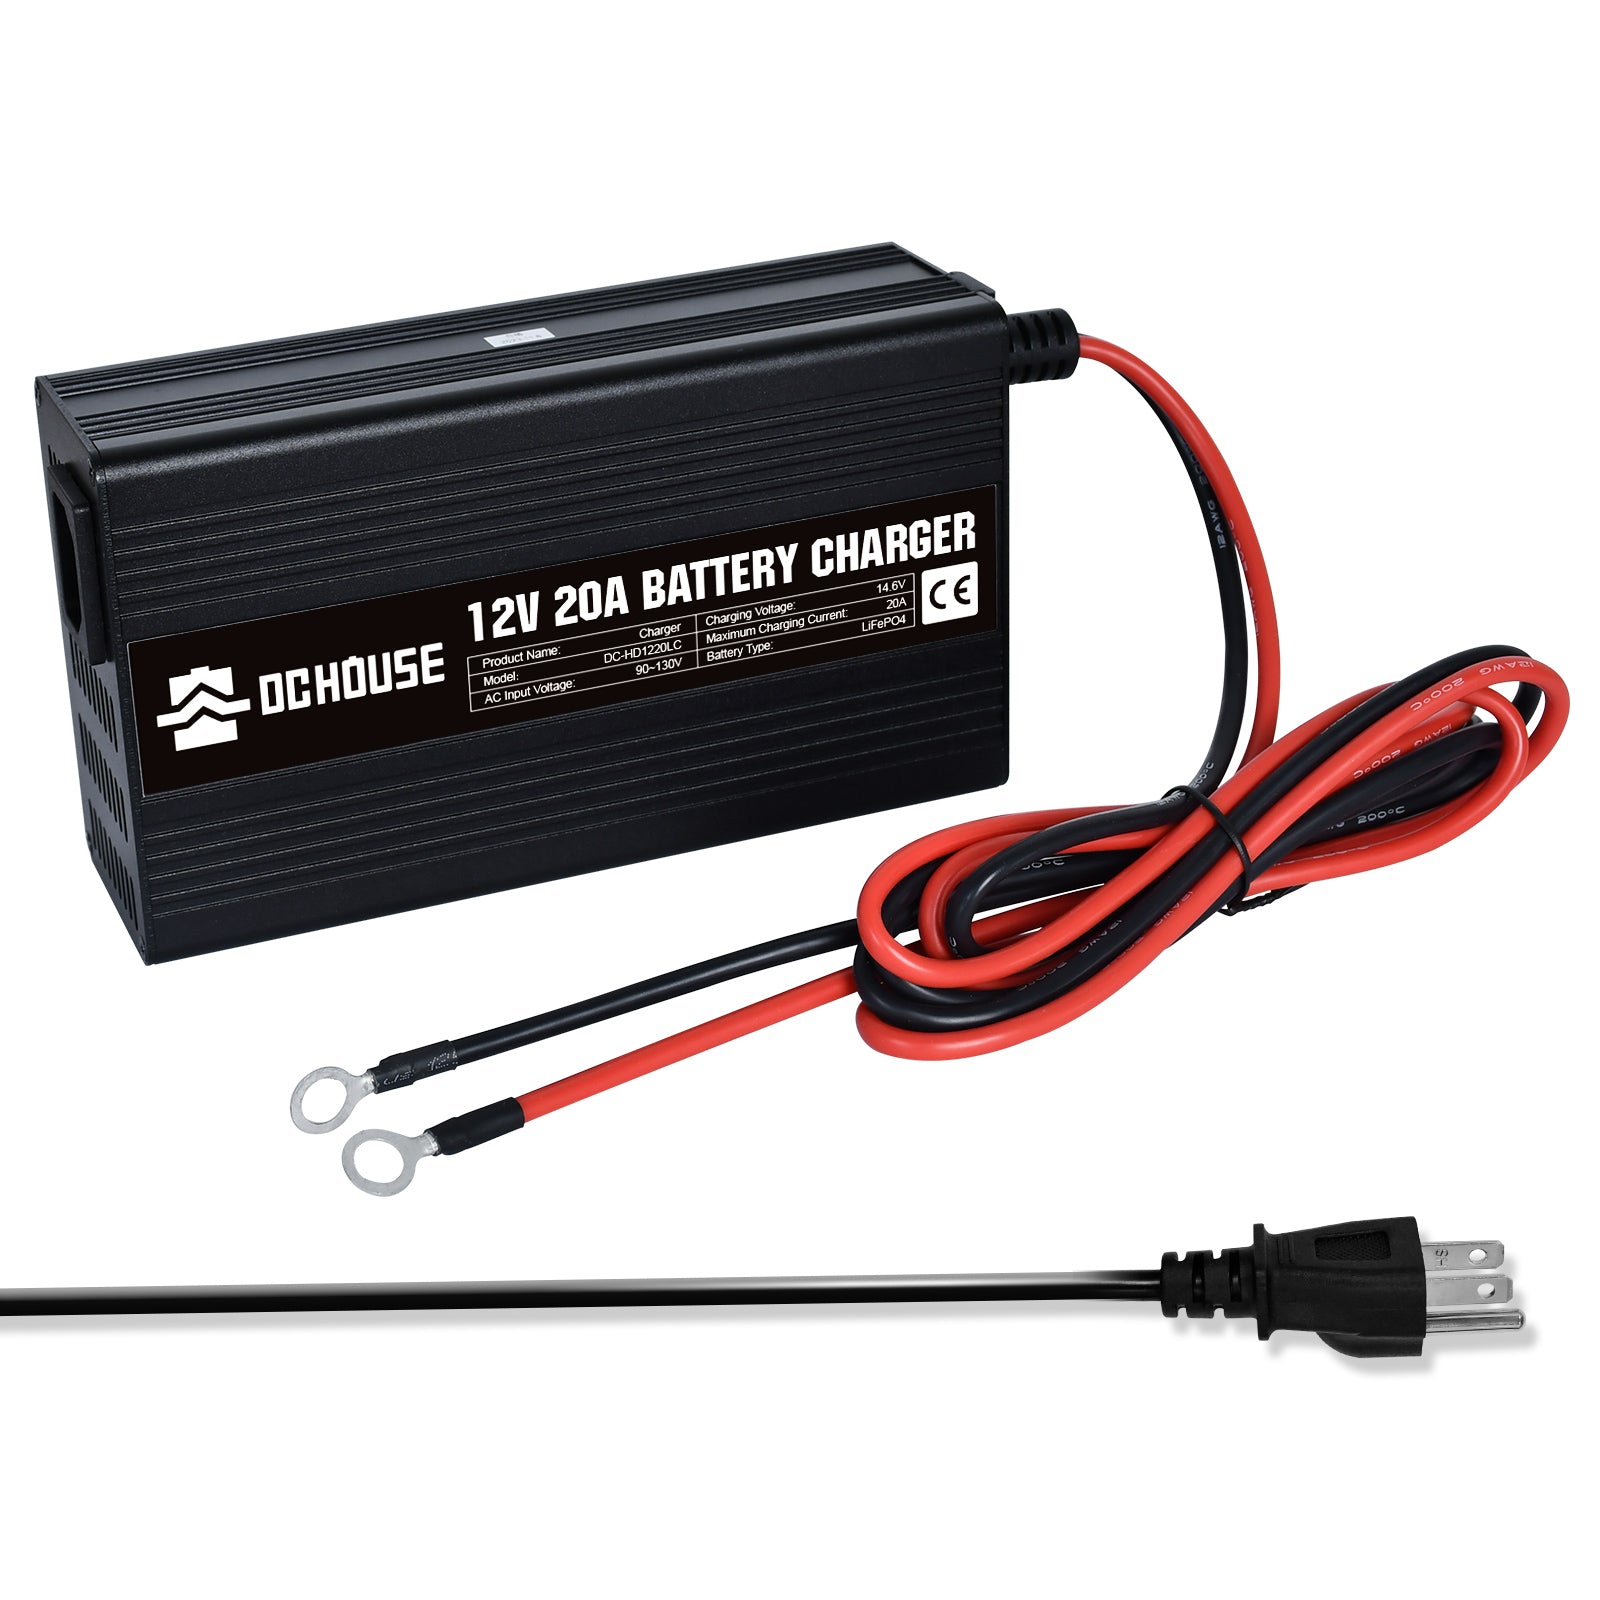 dchouse_12V_20A_LiFePO4_portable_battery_charger_1